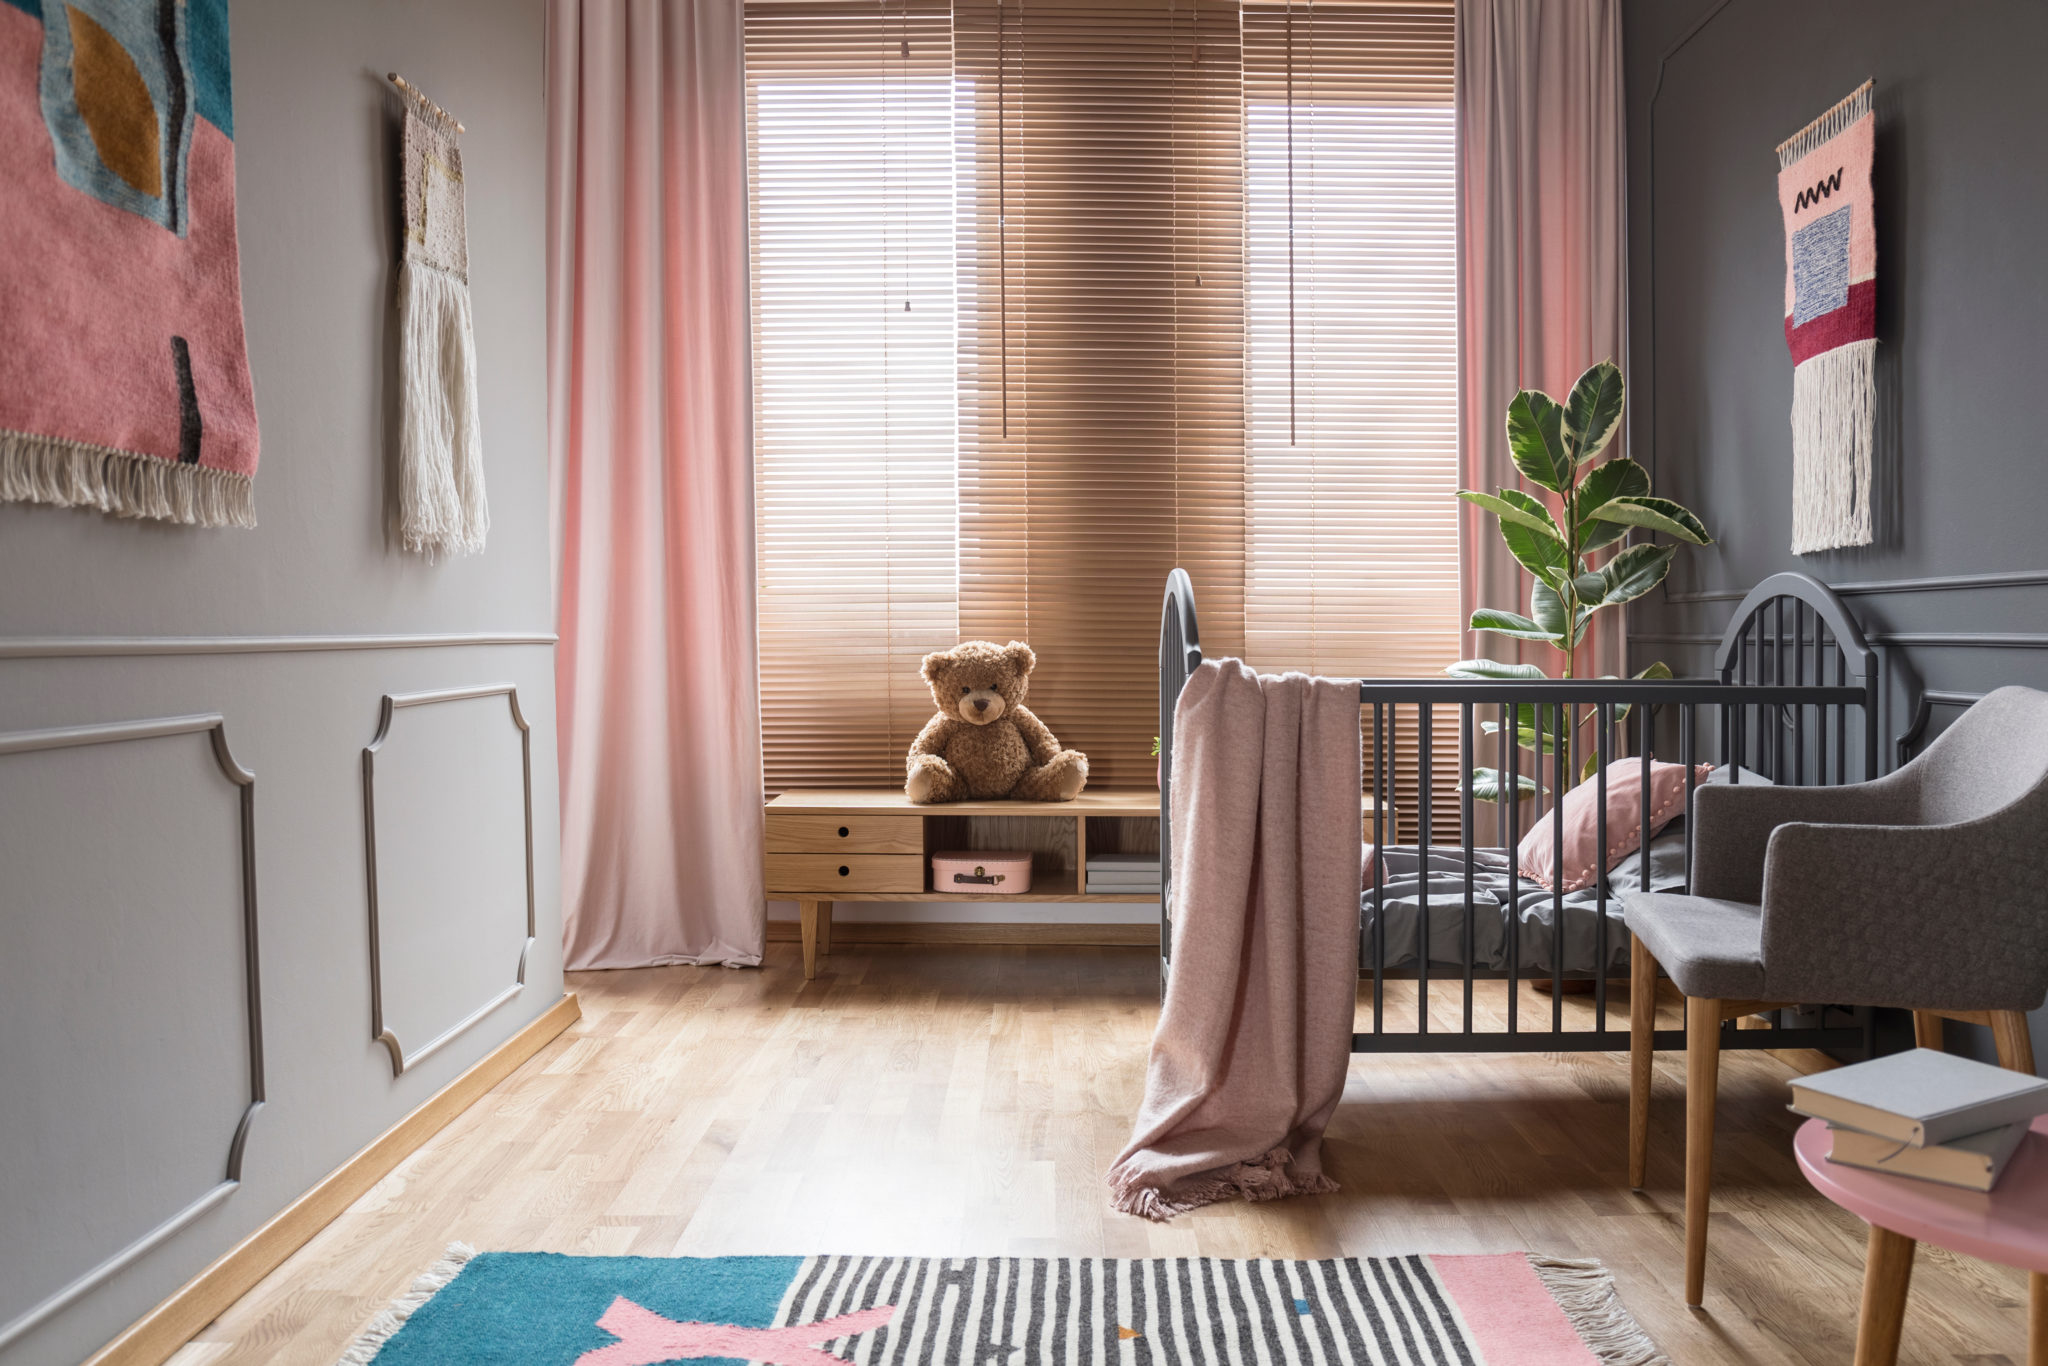 5 Best Window Coverings for Your Child’s Room